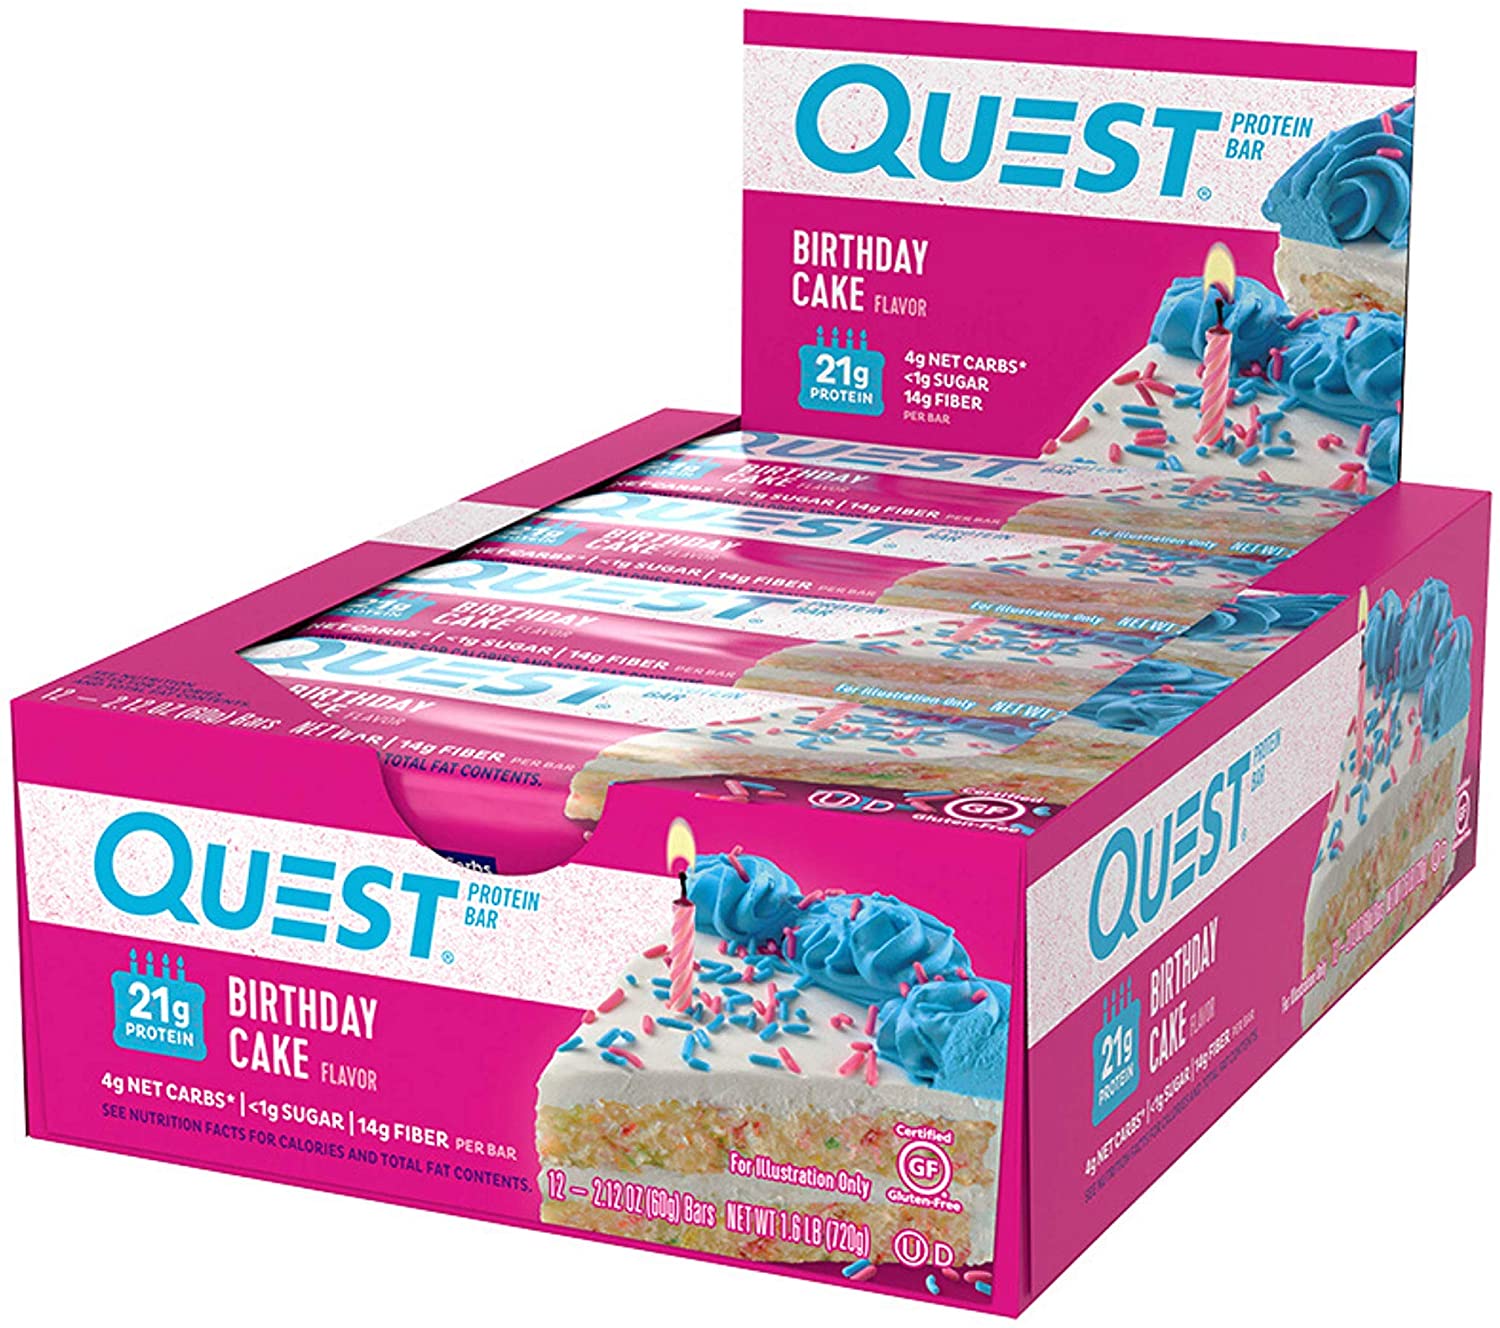 Quest Protein Bar – Birthday Cake Flavour Review